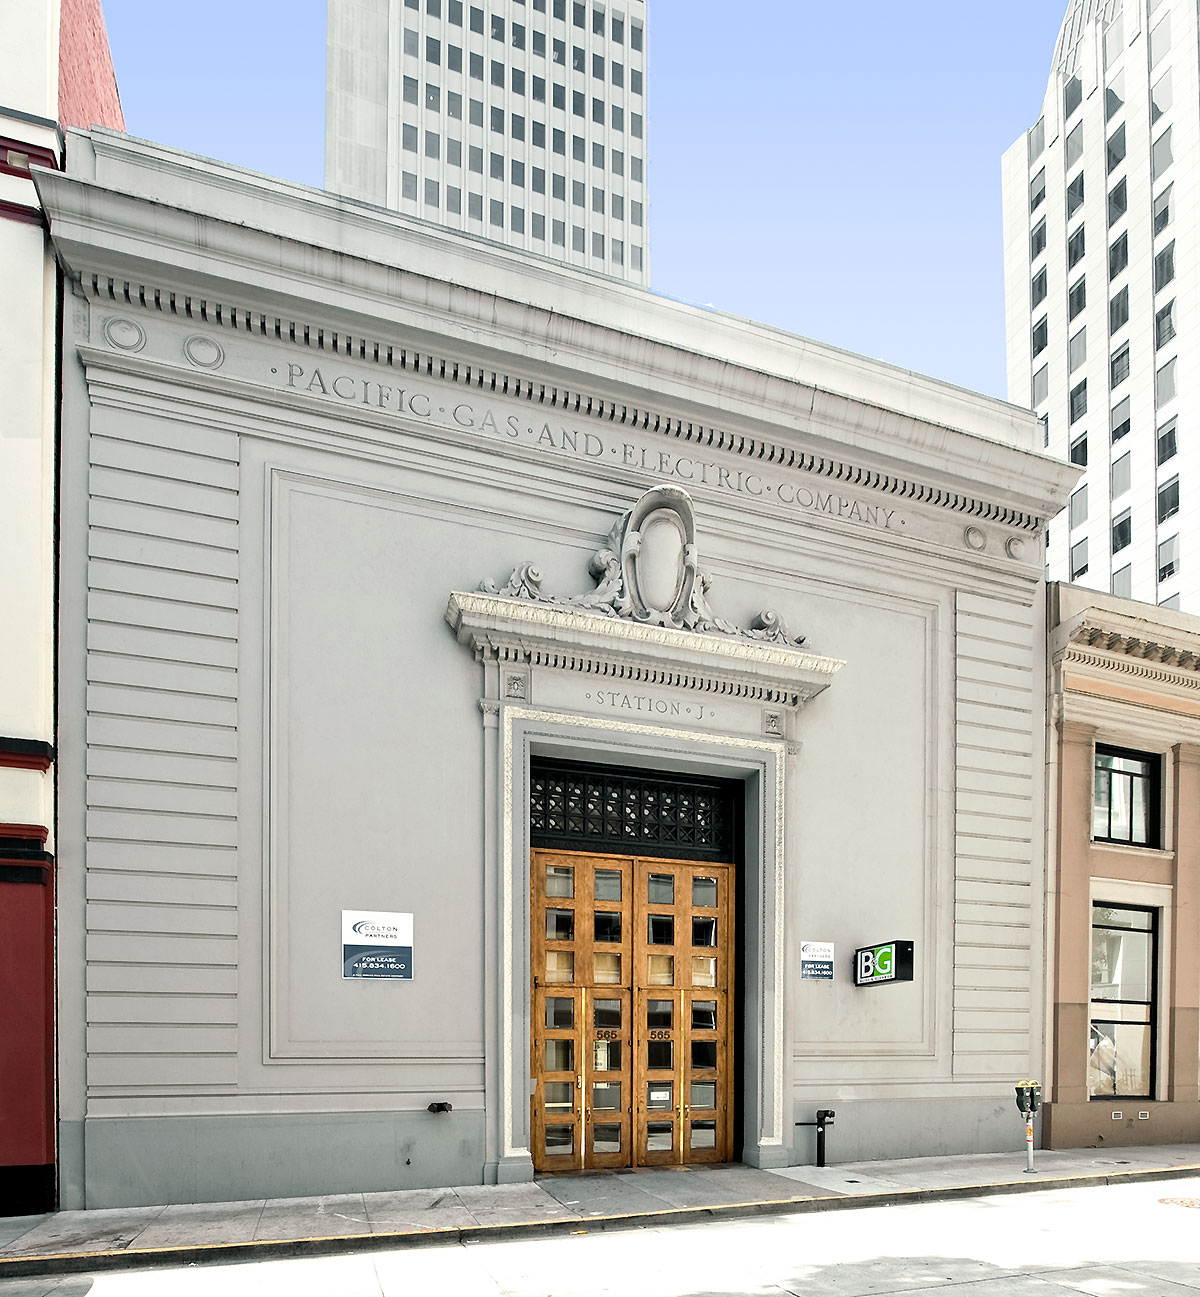 The PG&E Substation J was designed by Frederick H. Meyer and built in 1914.